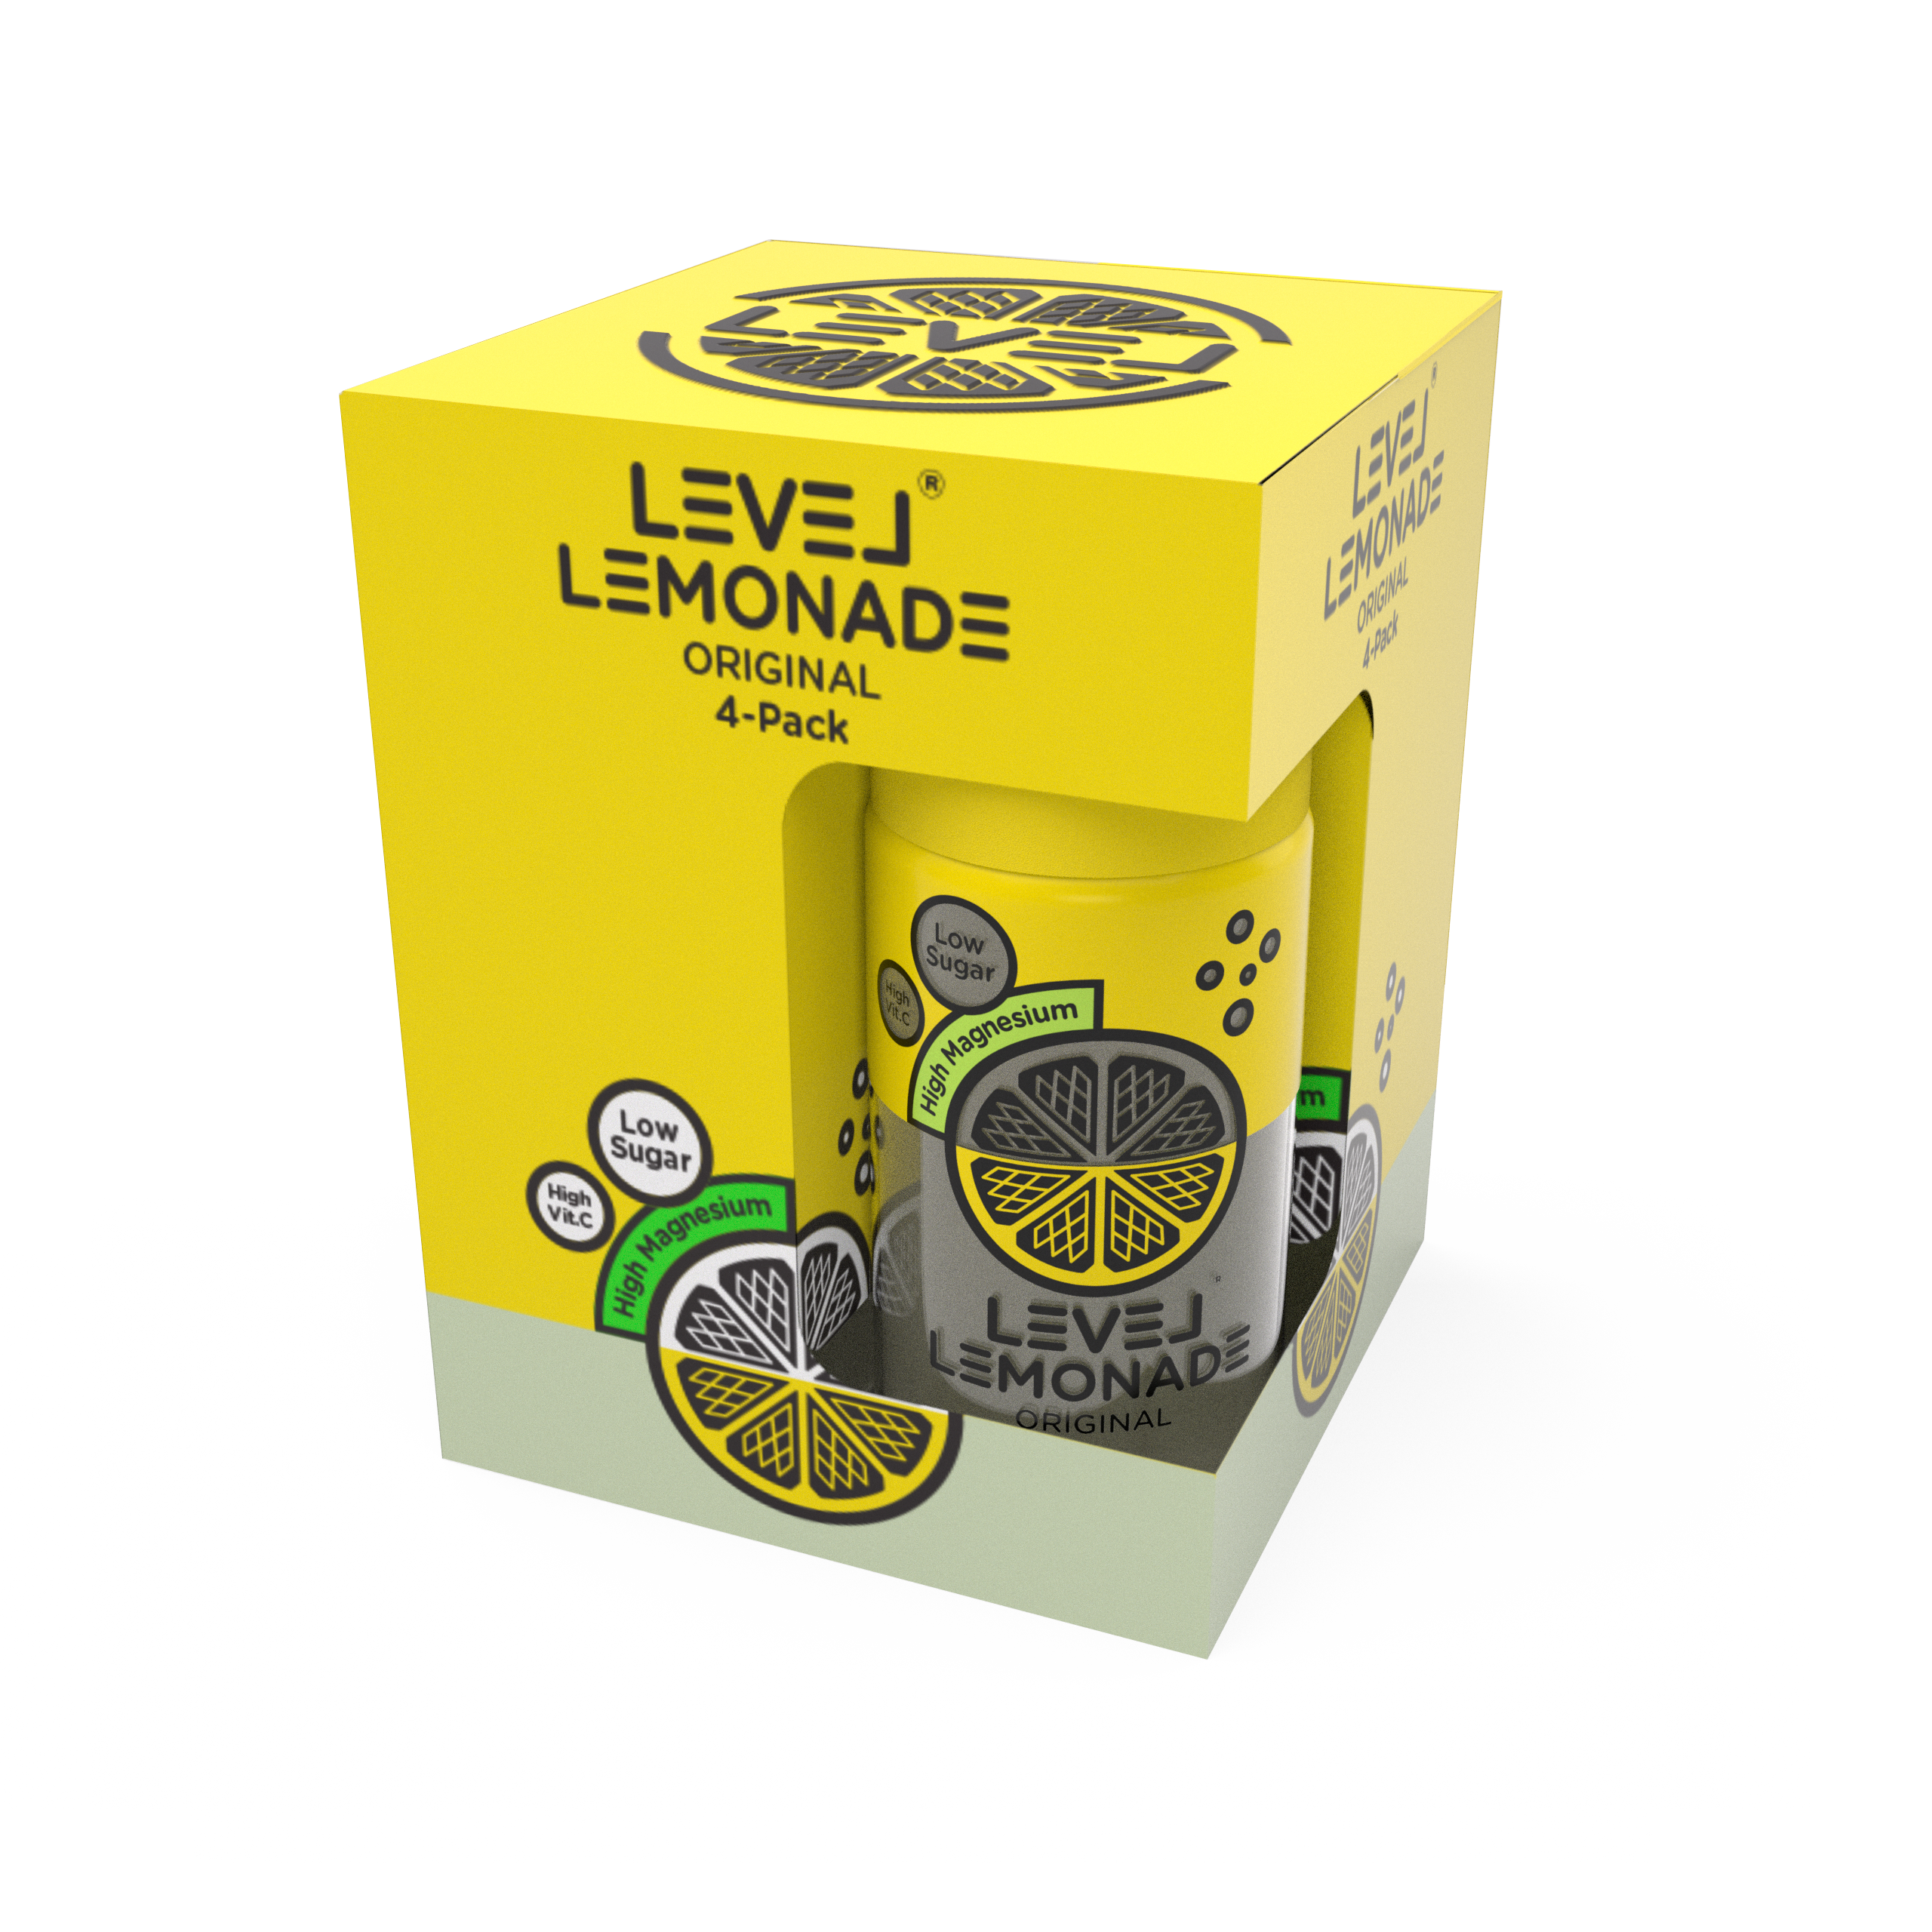 Exciting new packaging for Level Lemonade